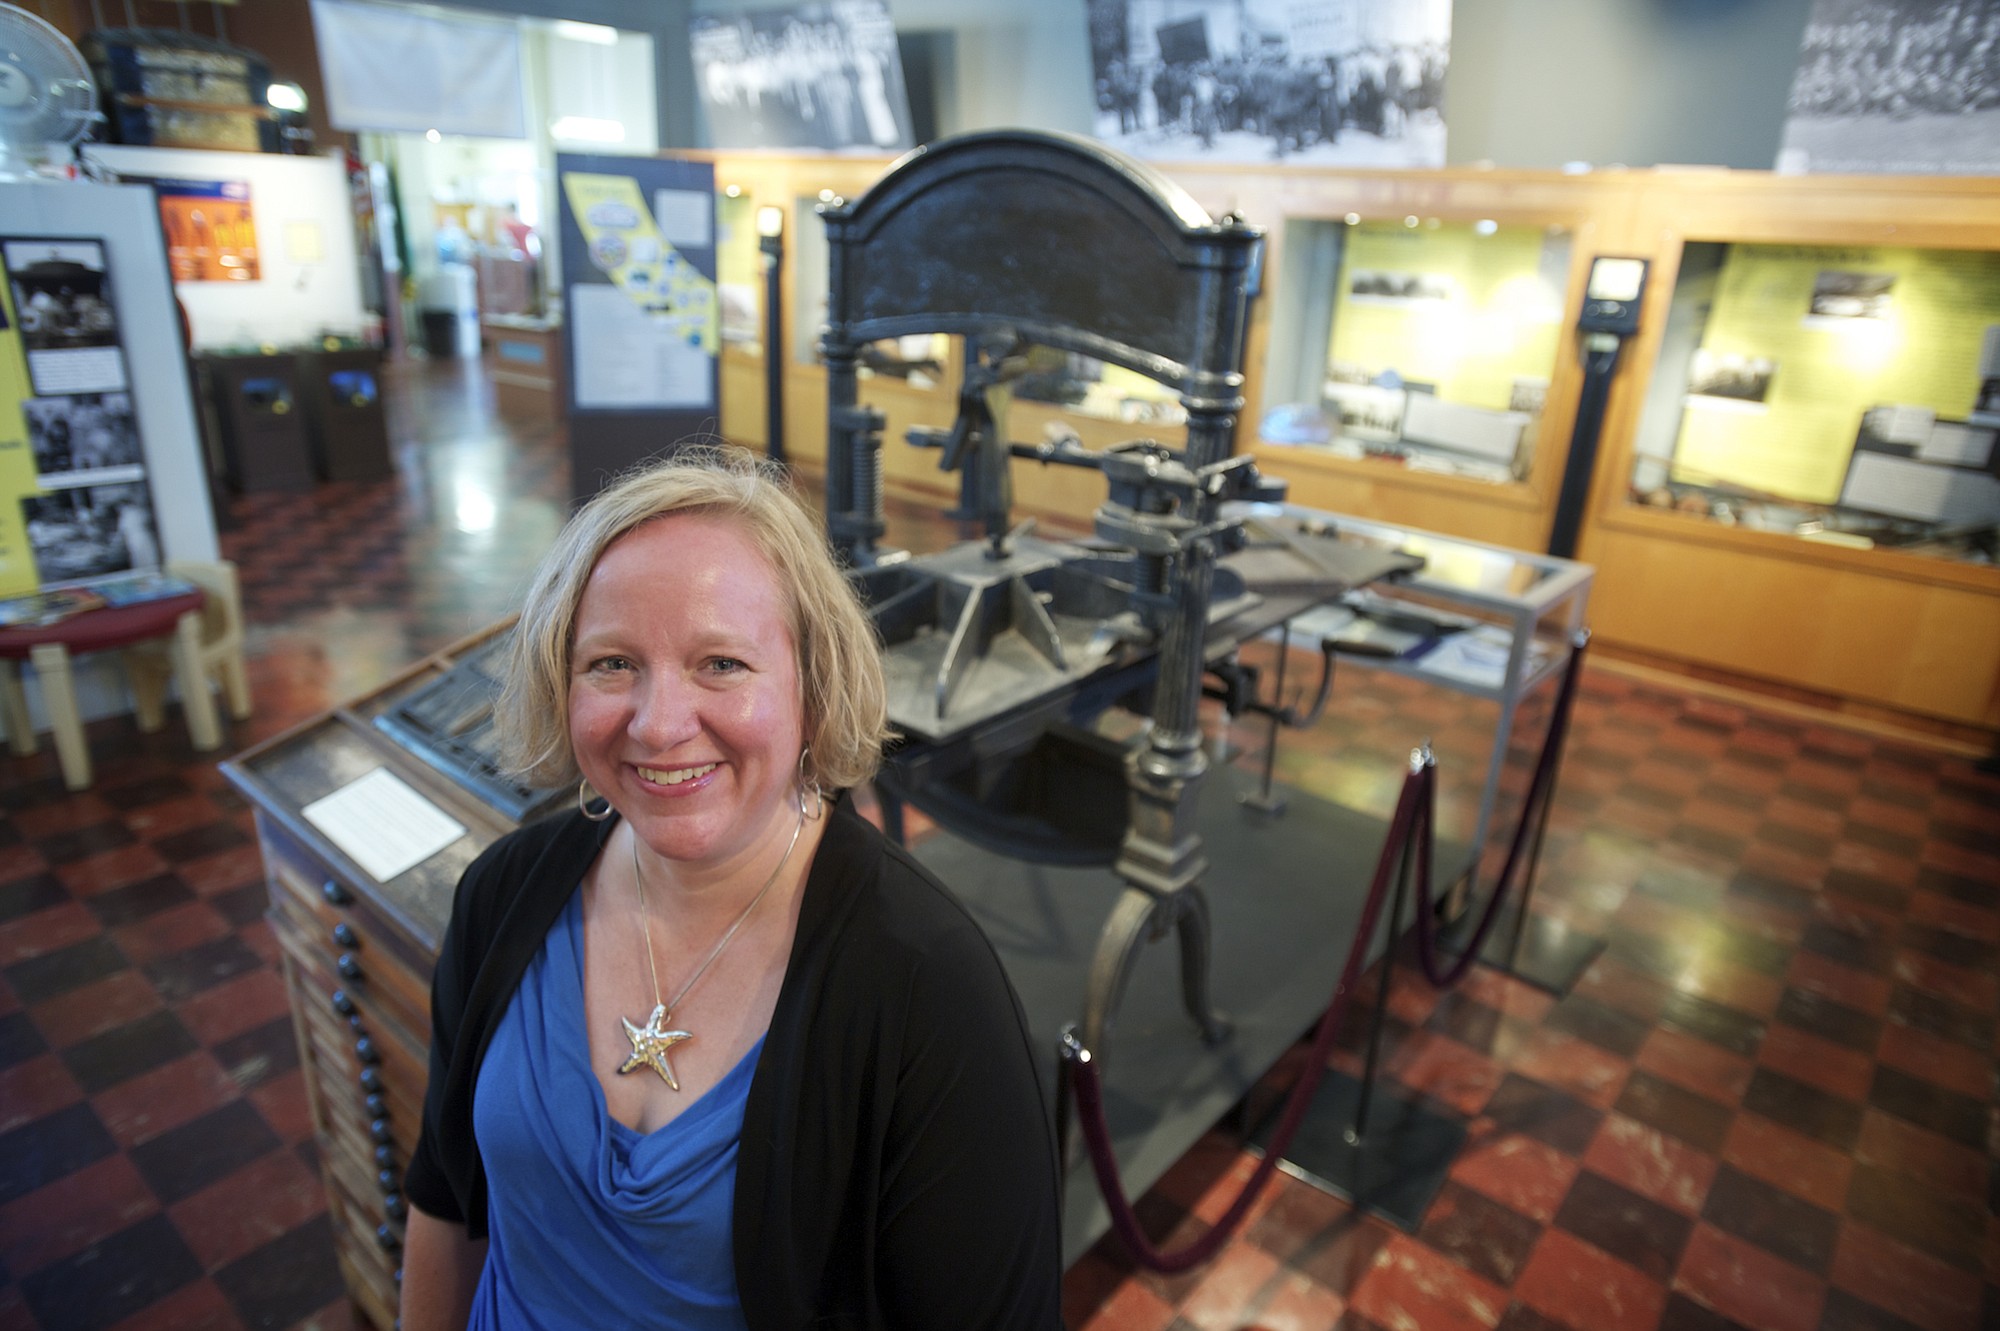 Katie Anderson will be taking over as executive director of the Clark County Historical Museum on July 28.